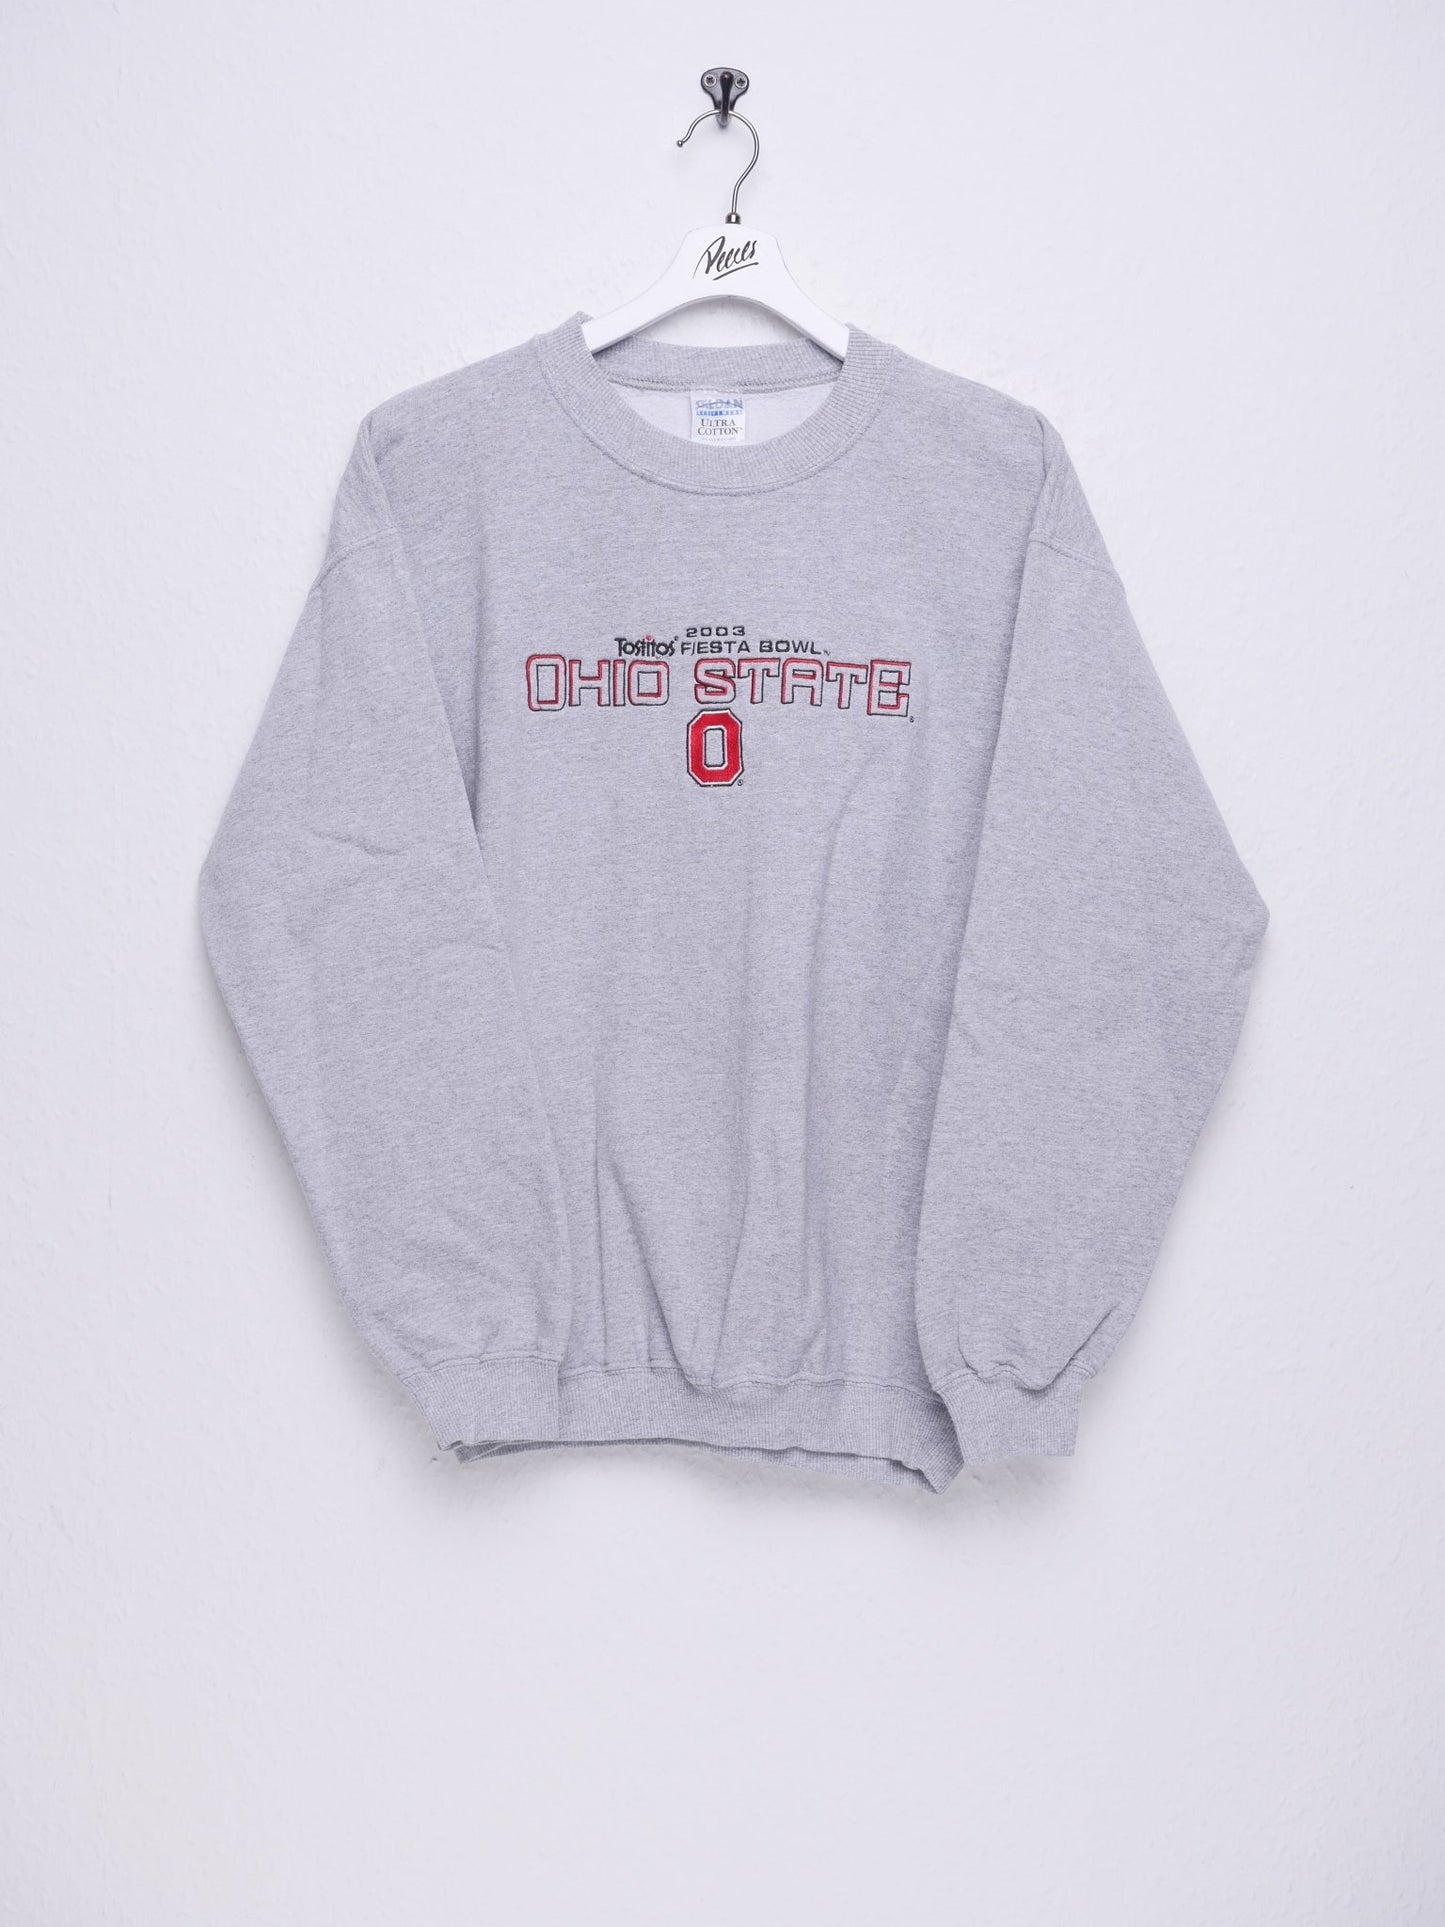 Tostitos Fiesta Bowl 2003 Ohio State embroidered Spellout grey Sweater - Peeces